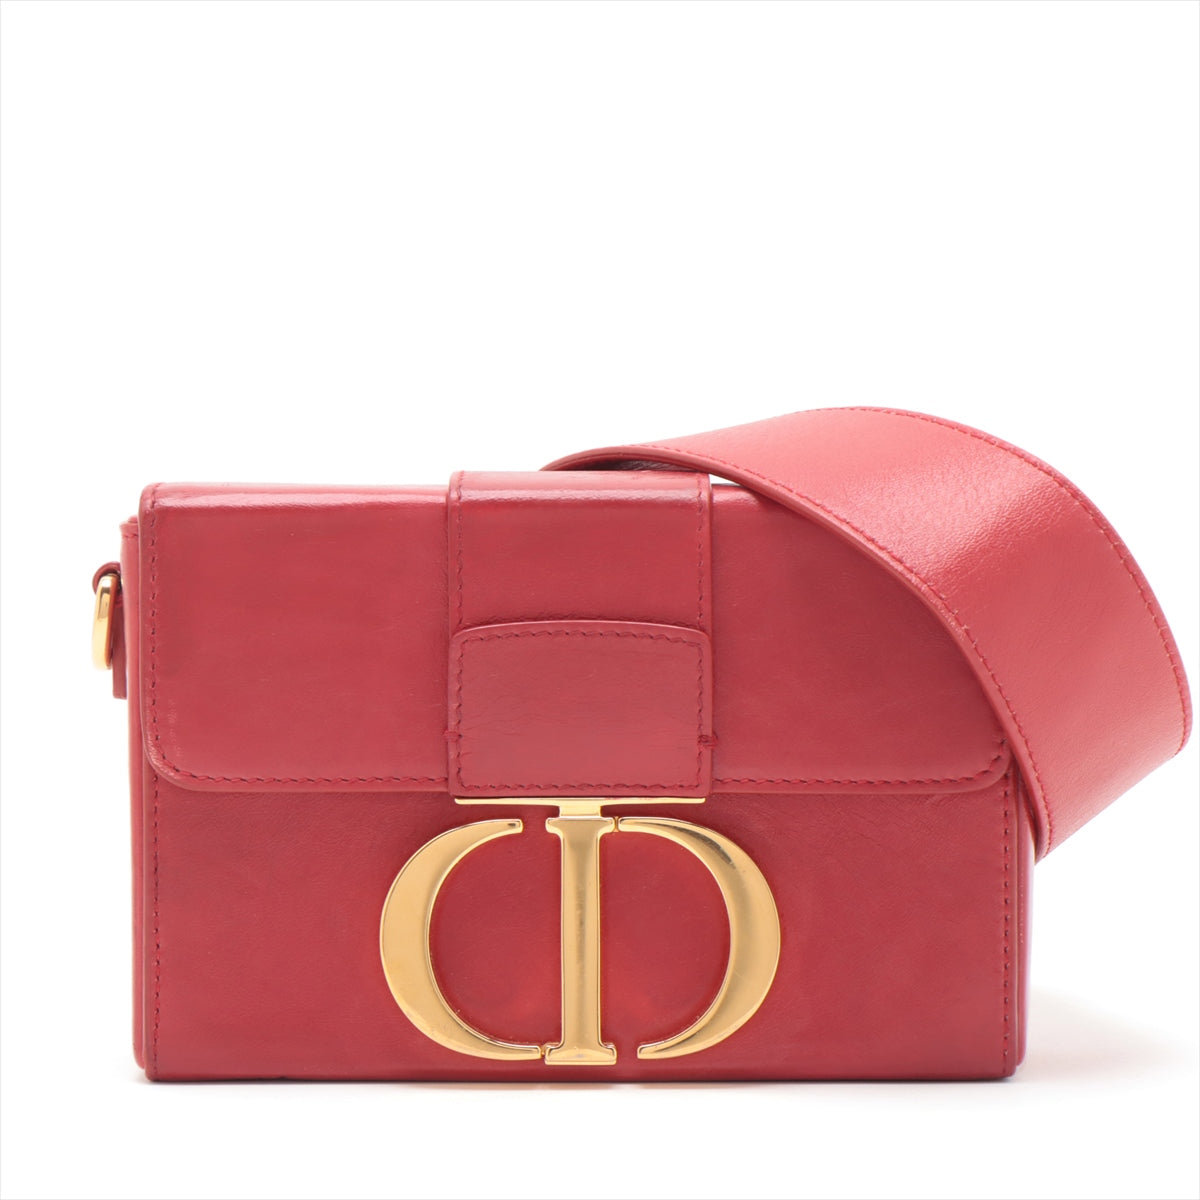 Christian Dior Montaigne 30 Leather Shoulder bag Red